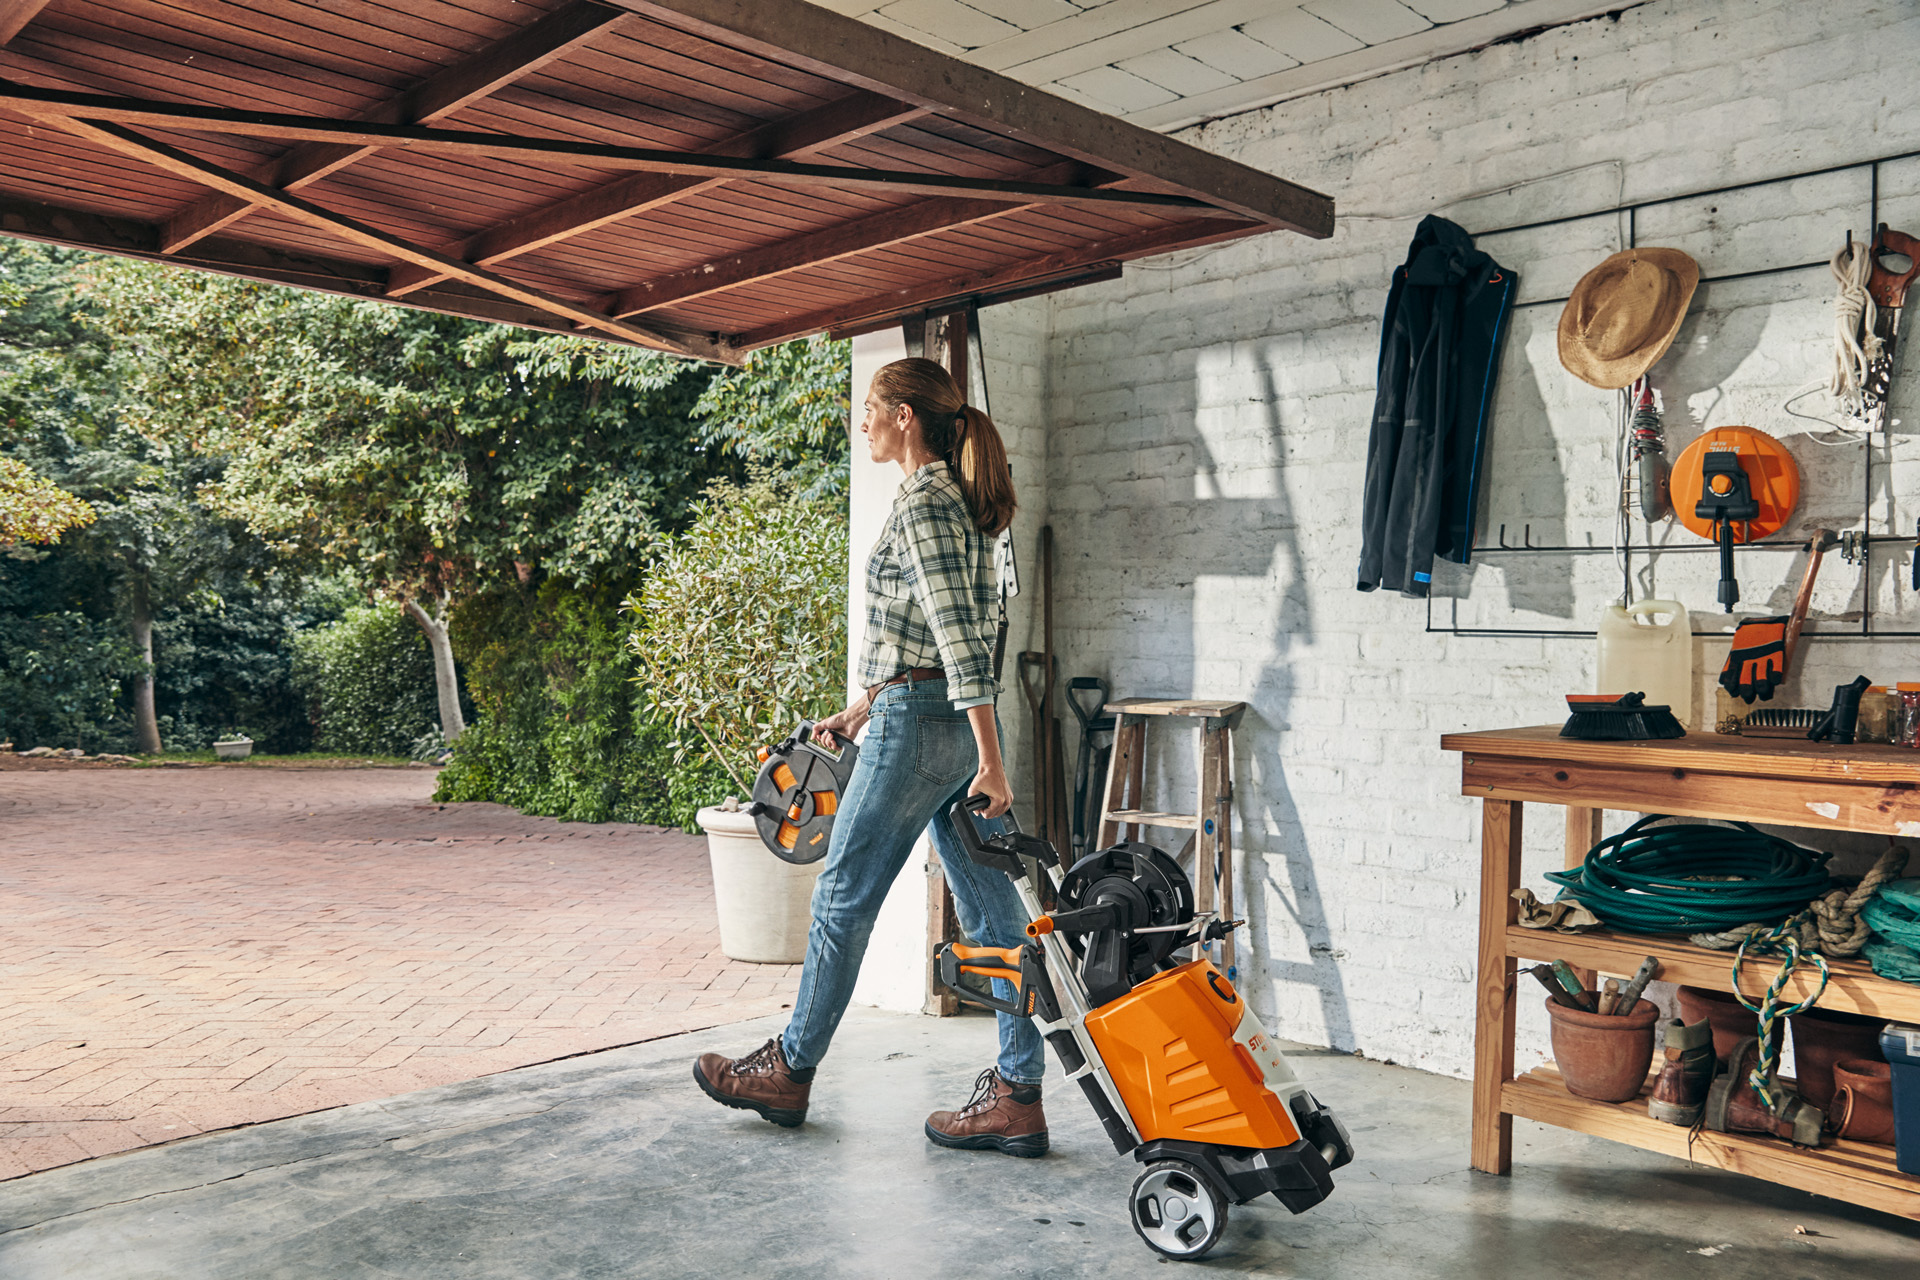 A woman exiting a garage with a STIHL RE 130 PLUS high-pressure cleaner that she is about to use